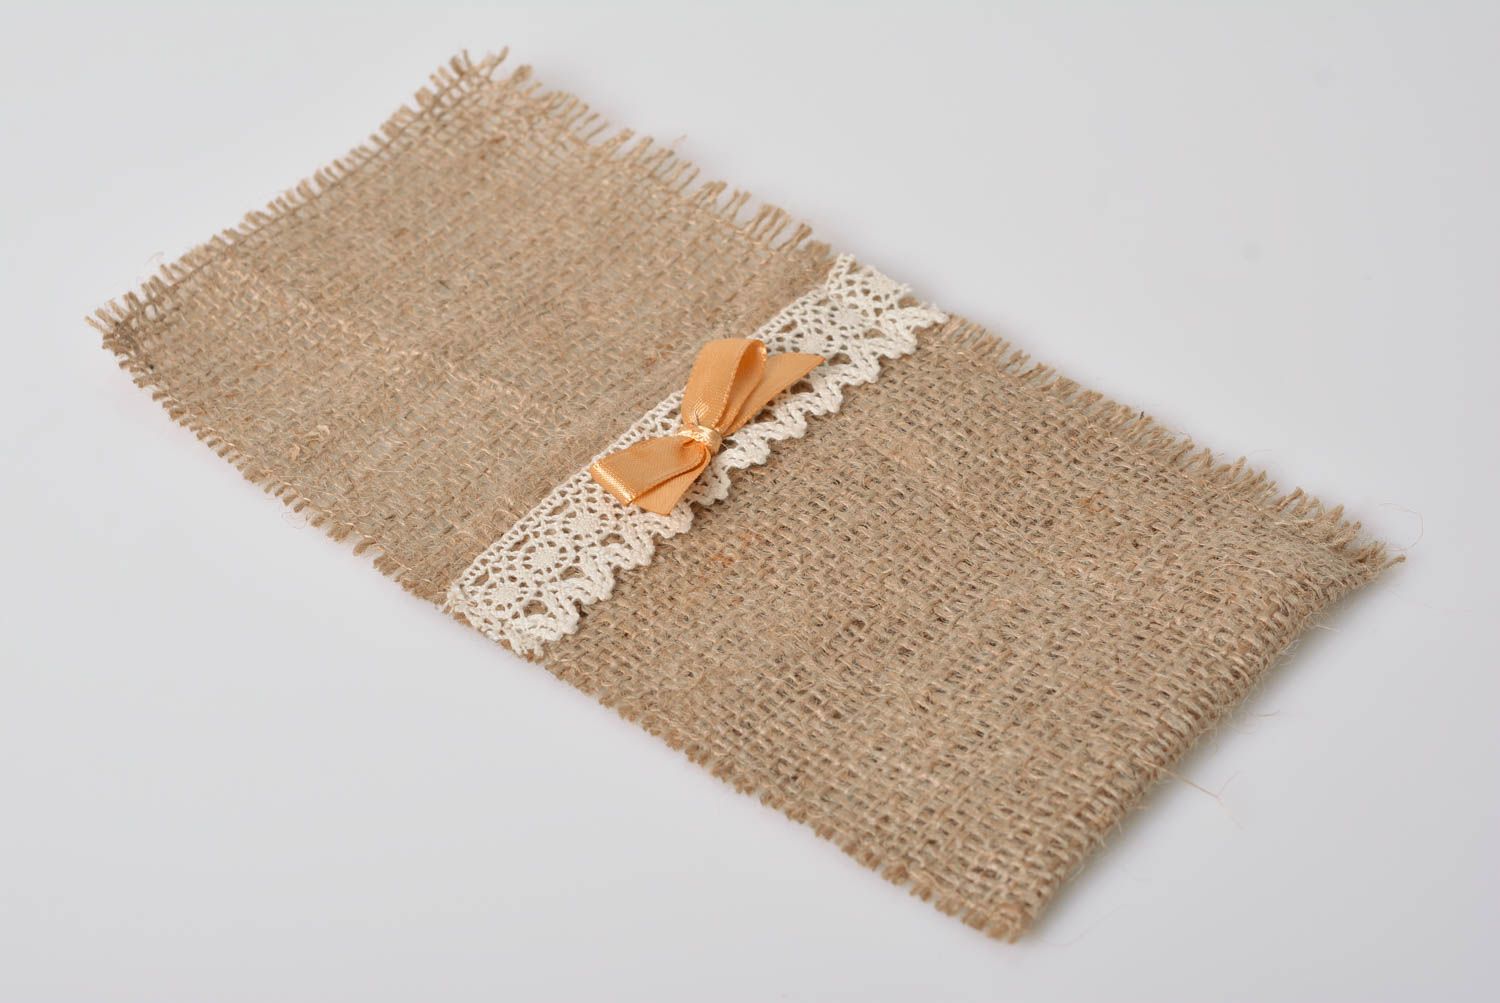 Case for cutlery made of burlap with lace designer accessory for kitchen photo 3